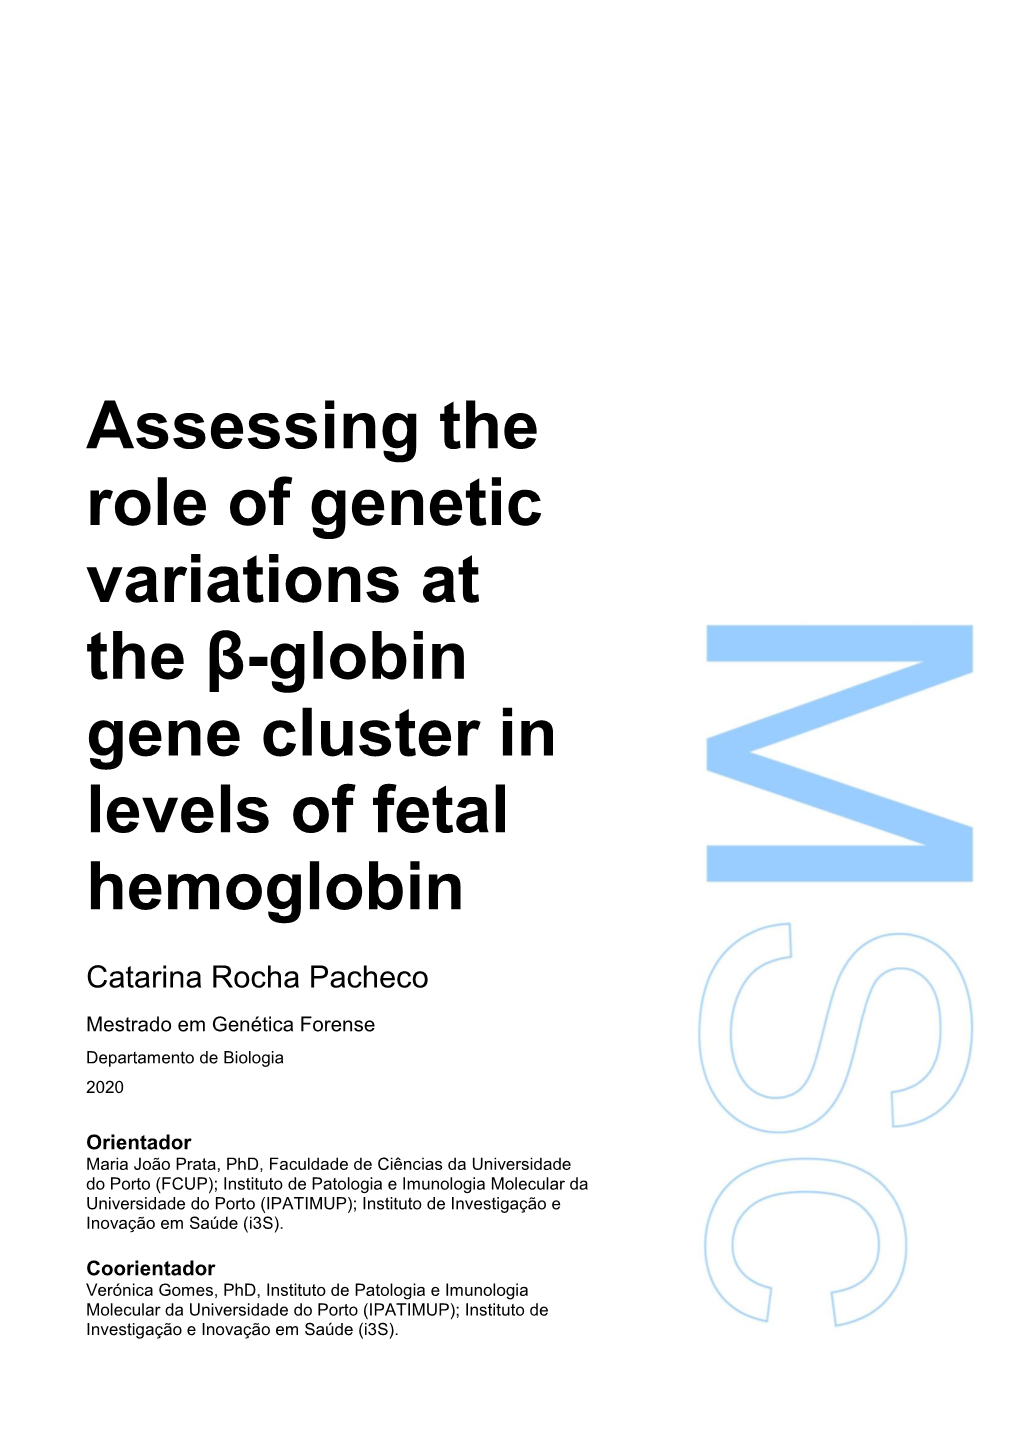 Assessing the Role of Genetic Variations at the Β-Globin Gene Cluster in Levels of Fetal Hemoglobin